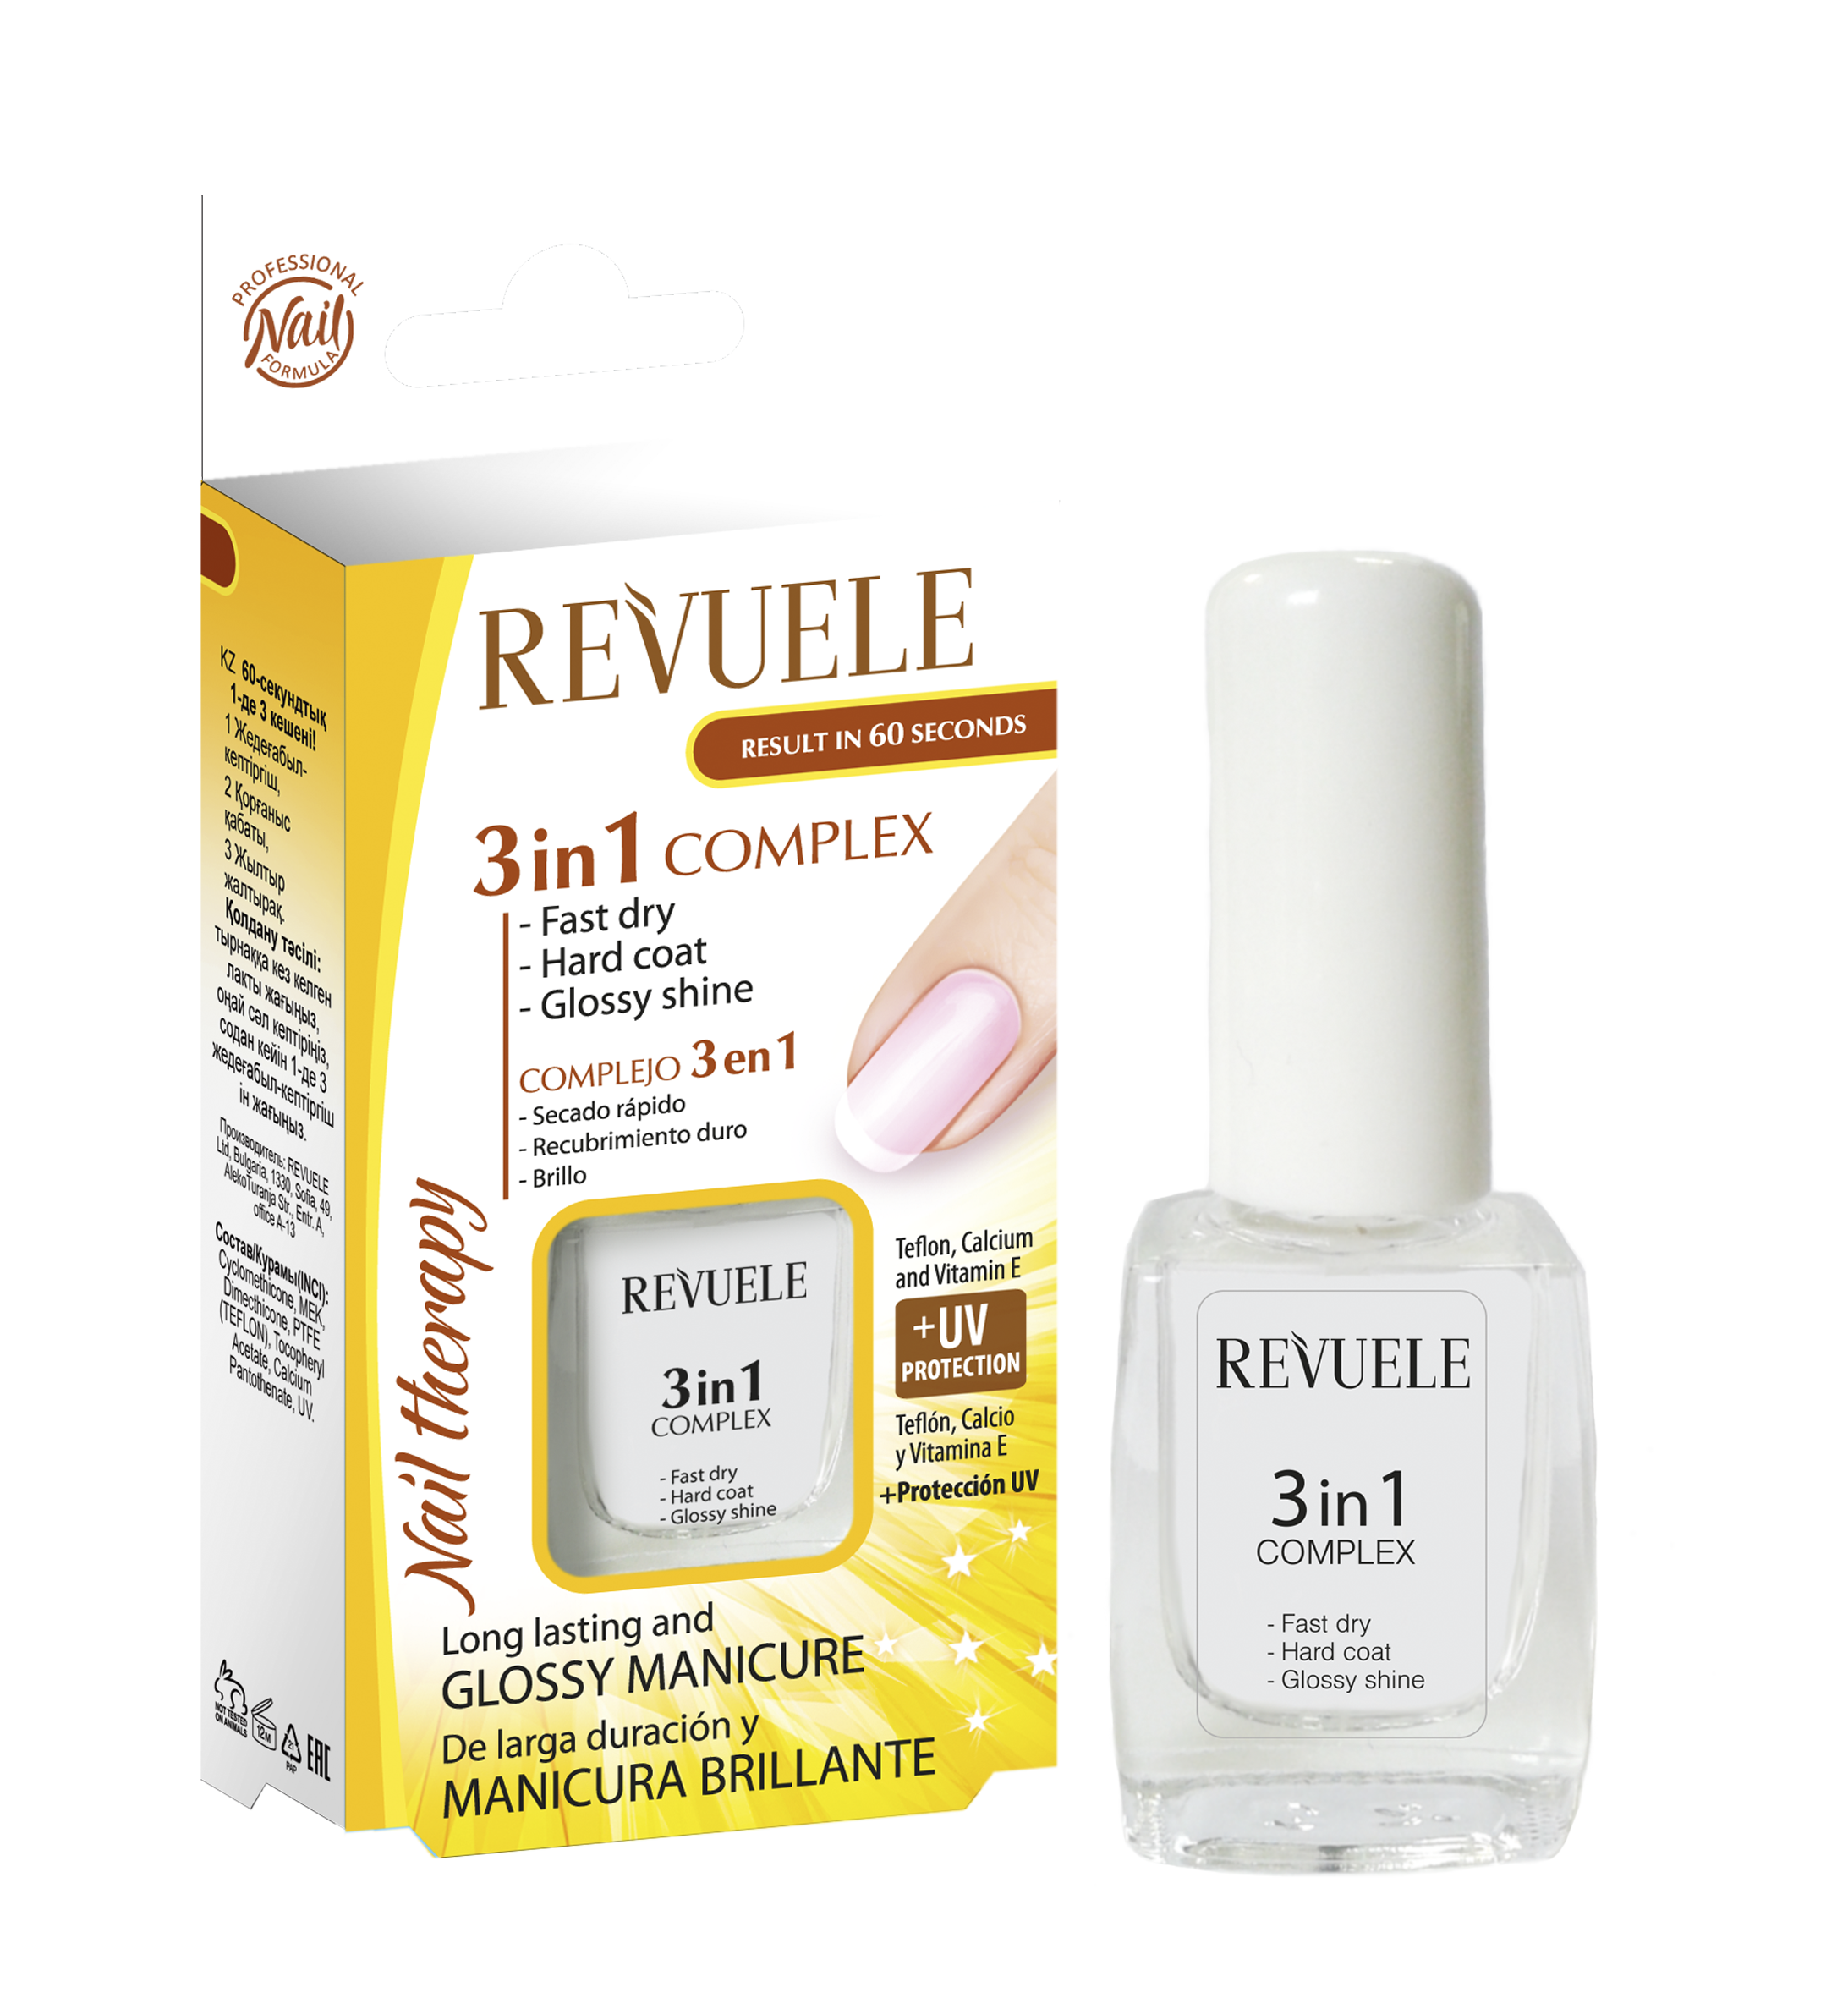 REVUELE NAIL THERAPY 3-in-1 Complex – Fast Dry, Hard Coat & Glossy Shine